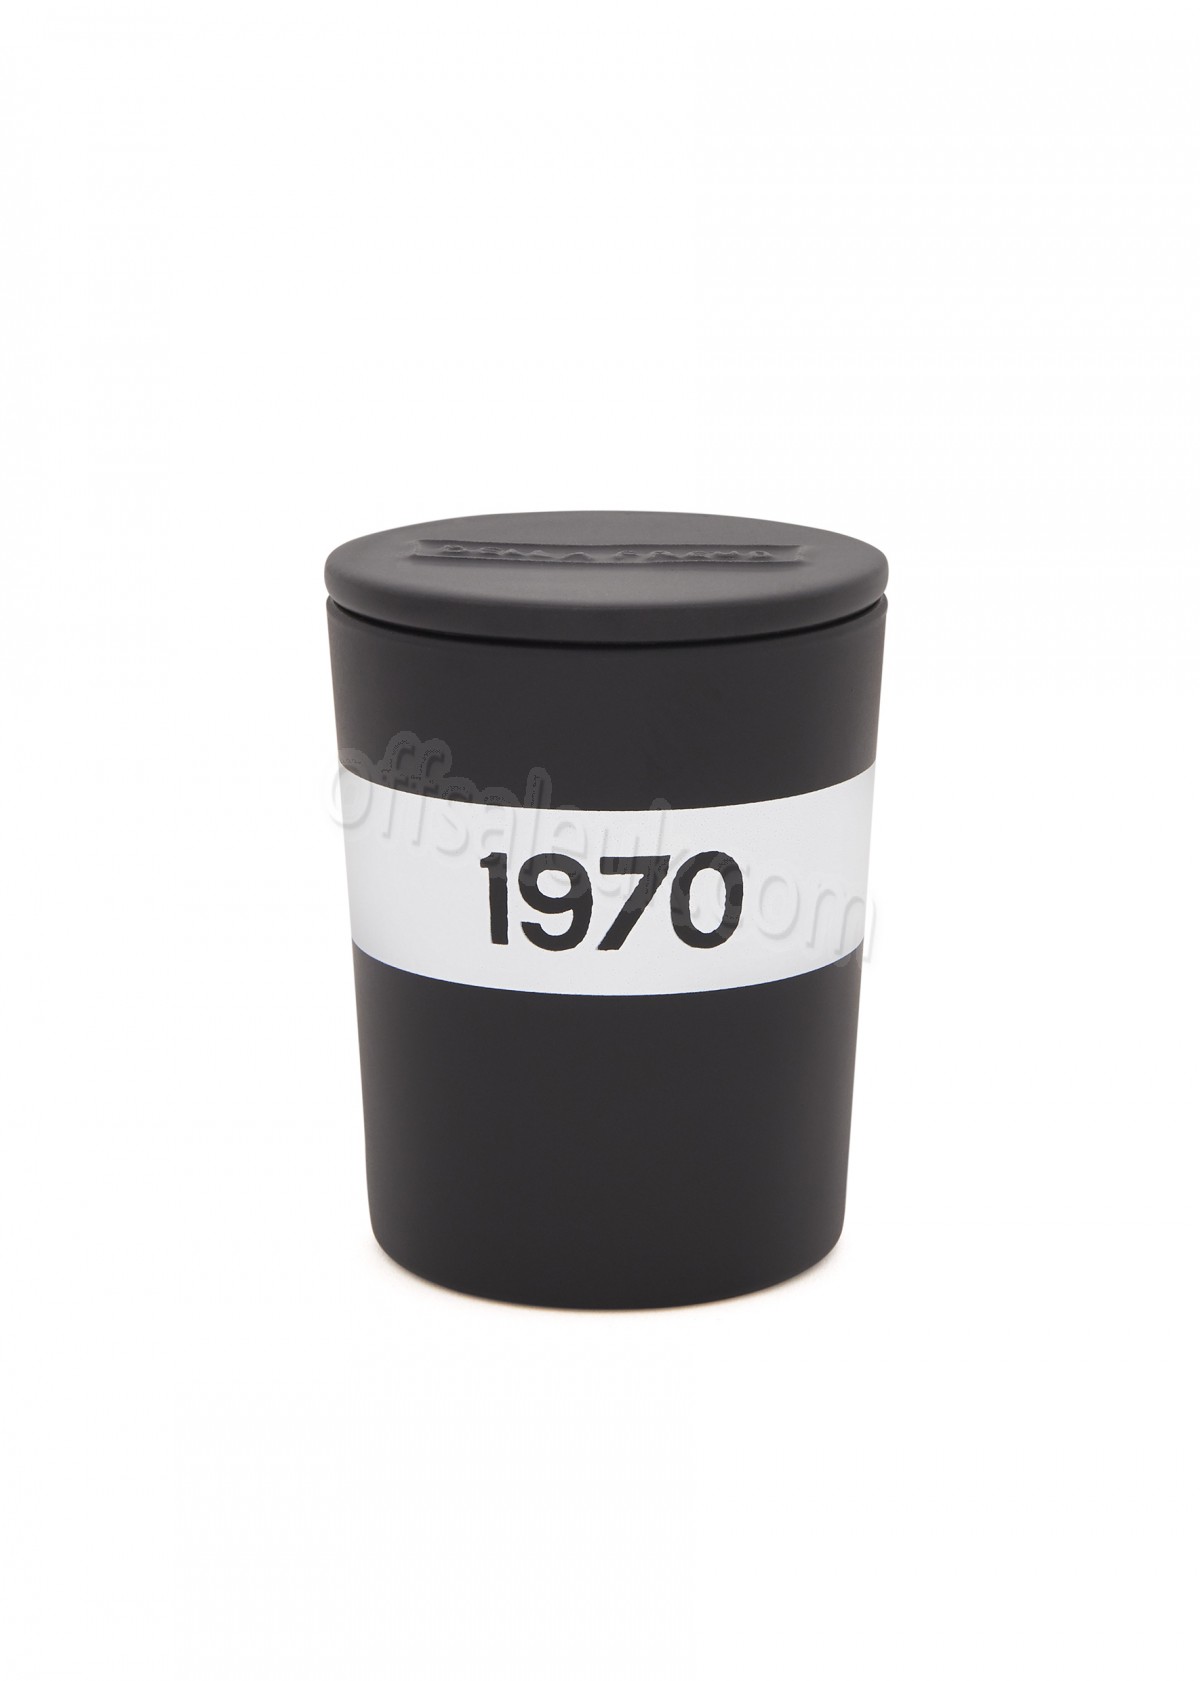 Cheap 1970 Candle - -1